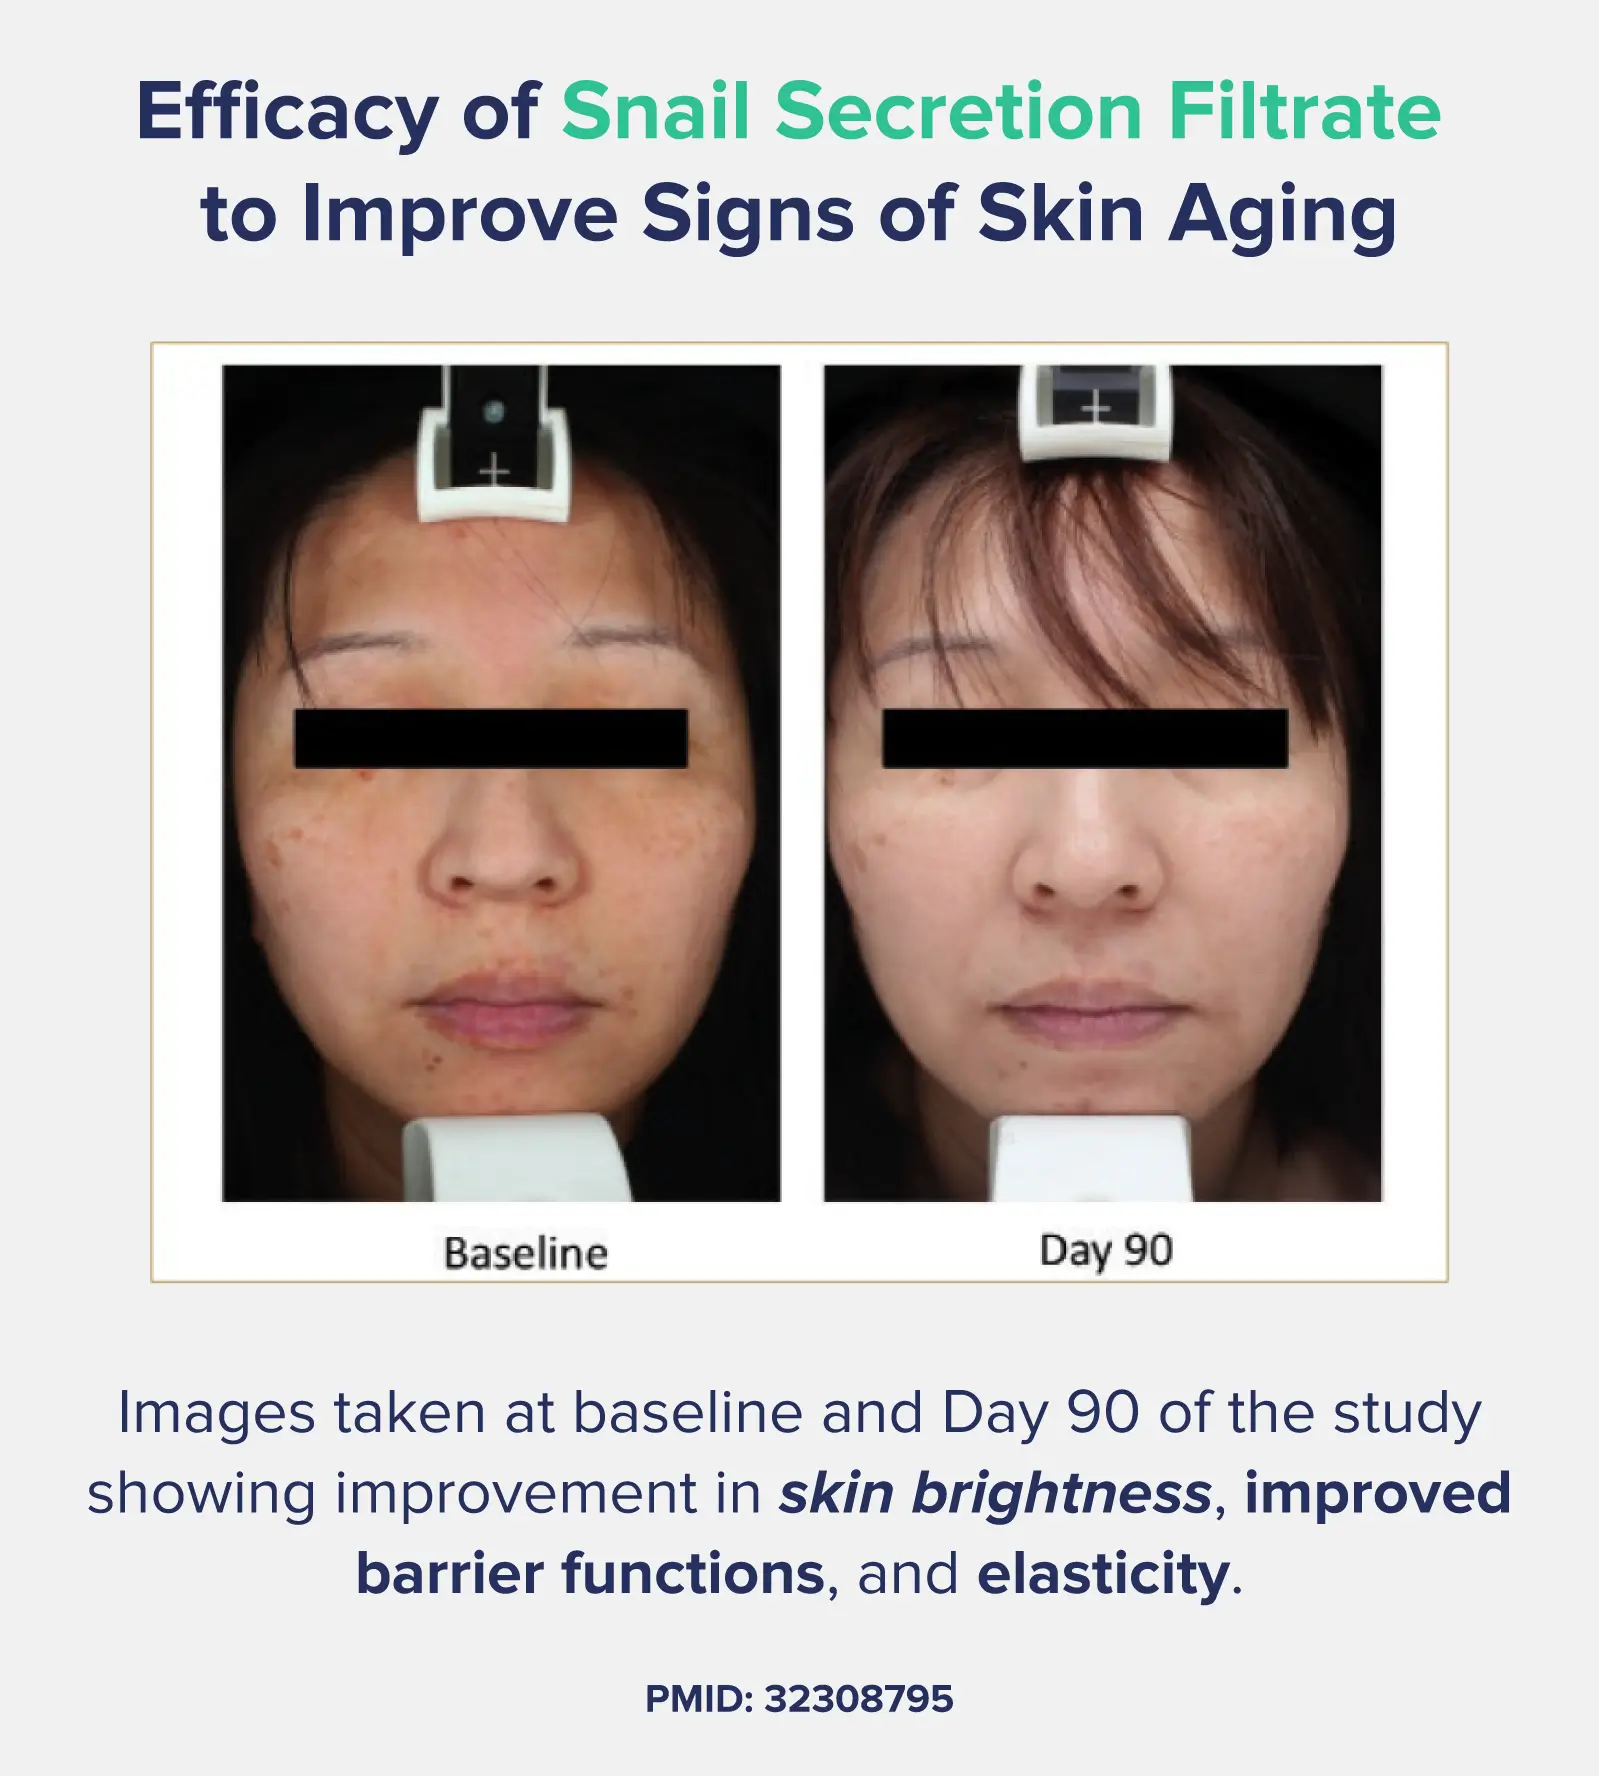 A graphic entitled "Efficacy of Snail Secretion Filtrate to Improve Signs of Skin Aging," depicting a pair of before-and-after images of a woman who took snail secretion filtrate for 90 days, along with a statement describing her results, which include skin brightness, elasticity, and more. 